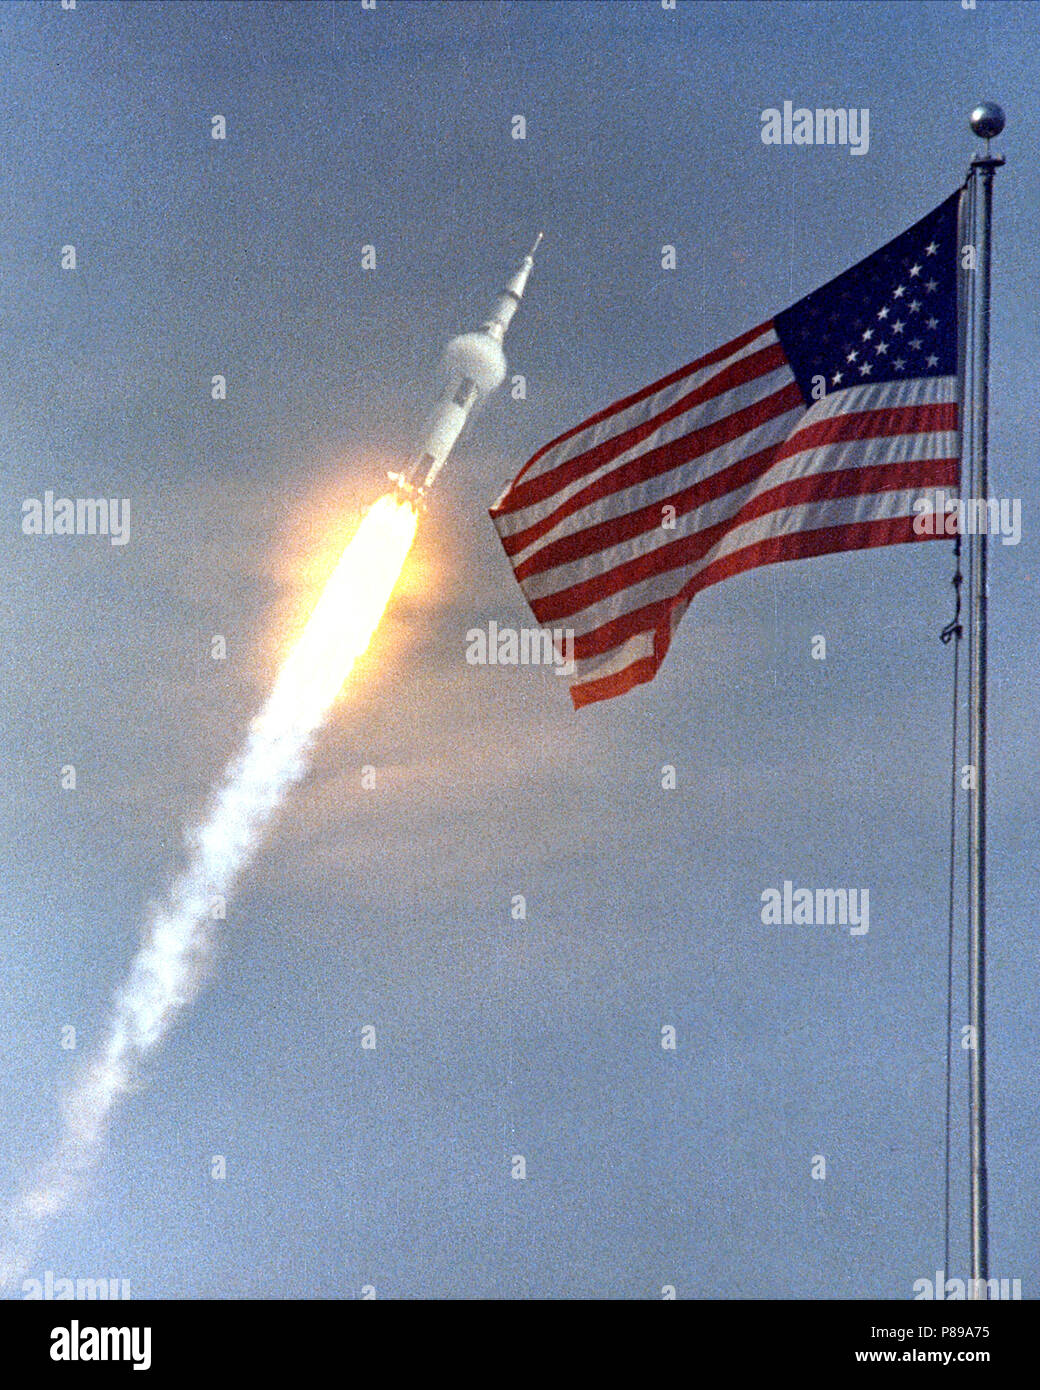 The American flag heralds the flight of Apollo 11, the first Lunar landing mission. The Apollo 11 Saturn V space vehicle lifted off with astronauts Neil A. Armstrong, Michael Collins and Edwin E. Aldrin, Jr., at 9:32 a.m. EDT July 16, 1969, from Kennedy Space Center's Launch Complex 39A. Stock Photo